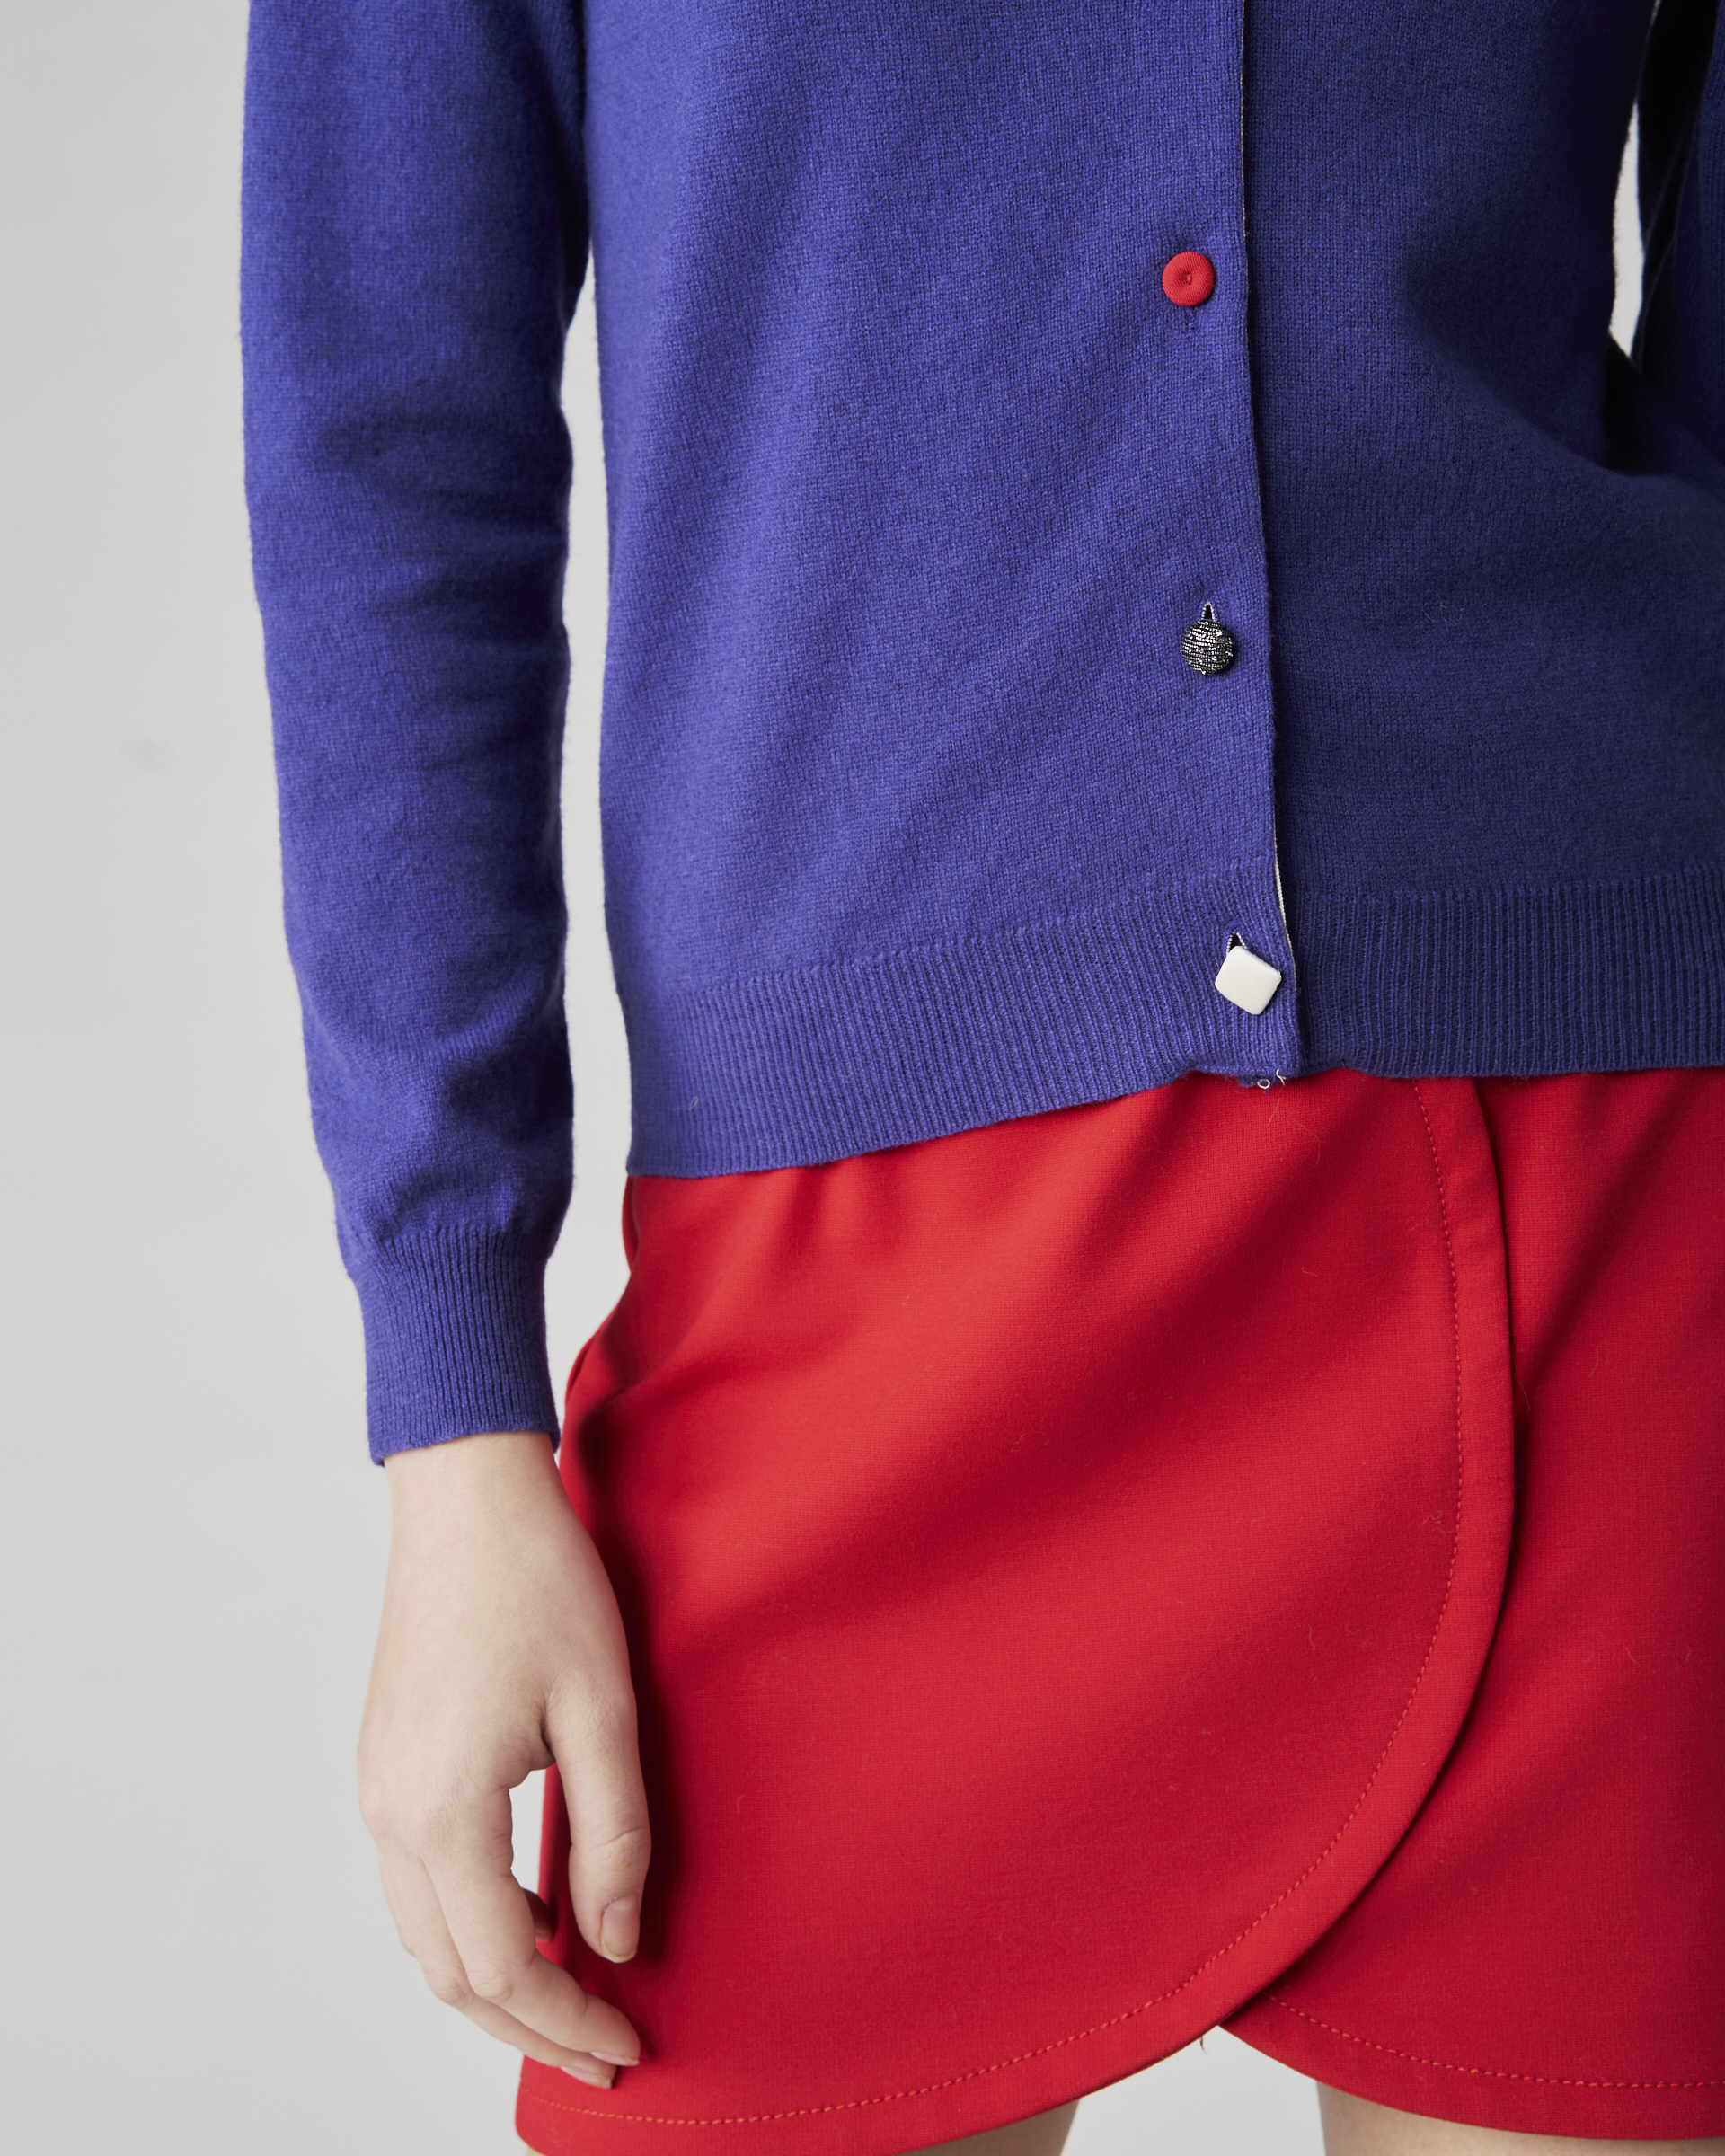 The Market Store | Knit Jacket With Different Buttons